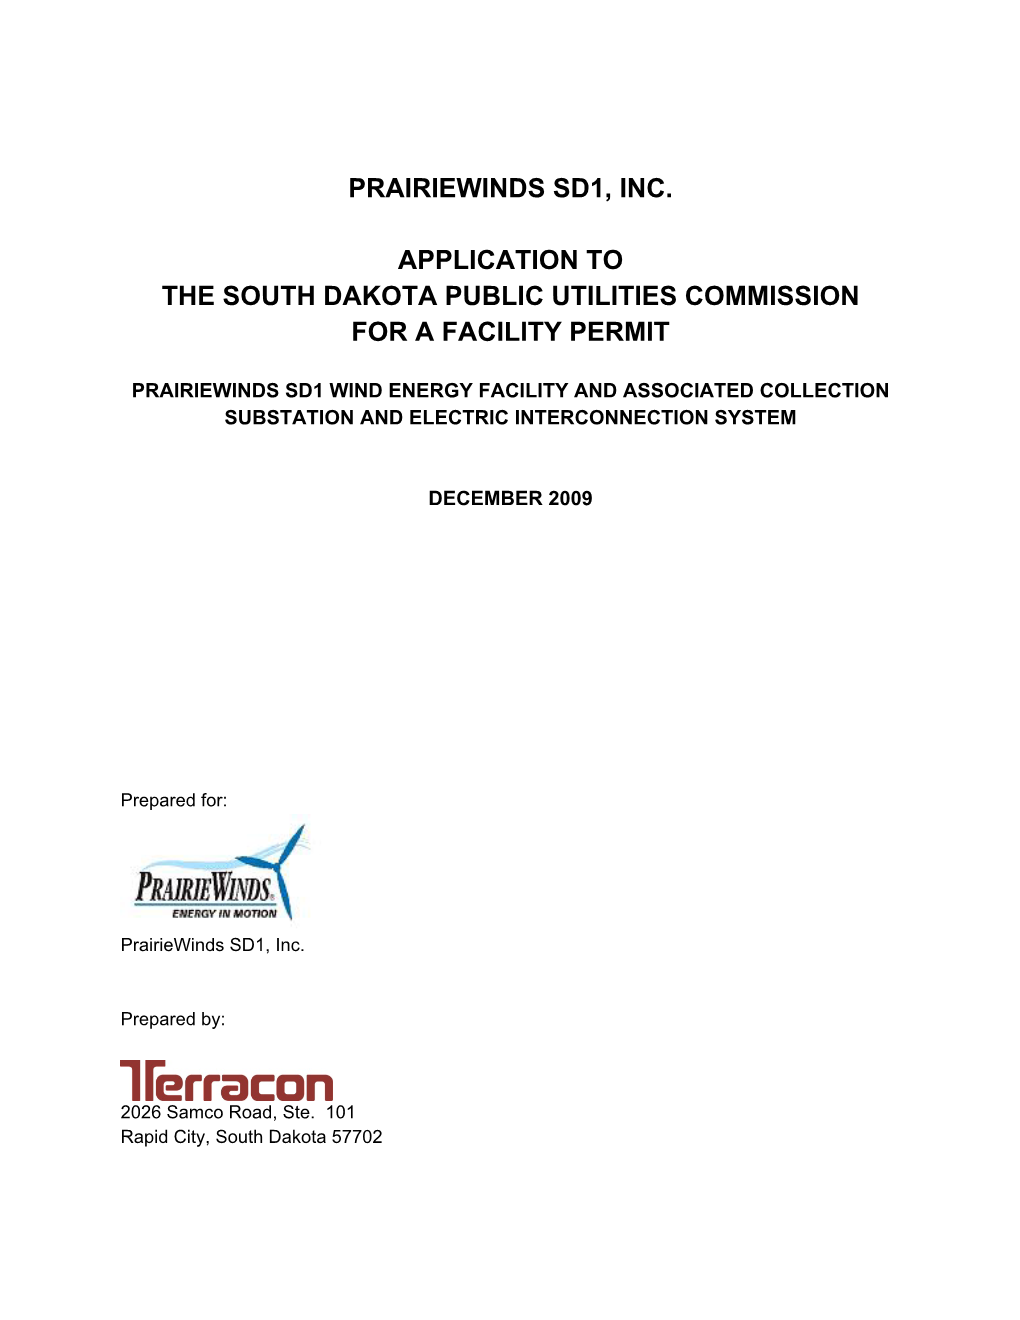 Prairiewinds Sd1, Inc. Application to the South